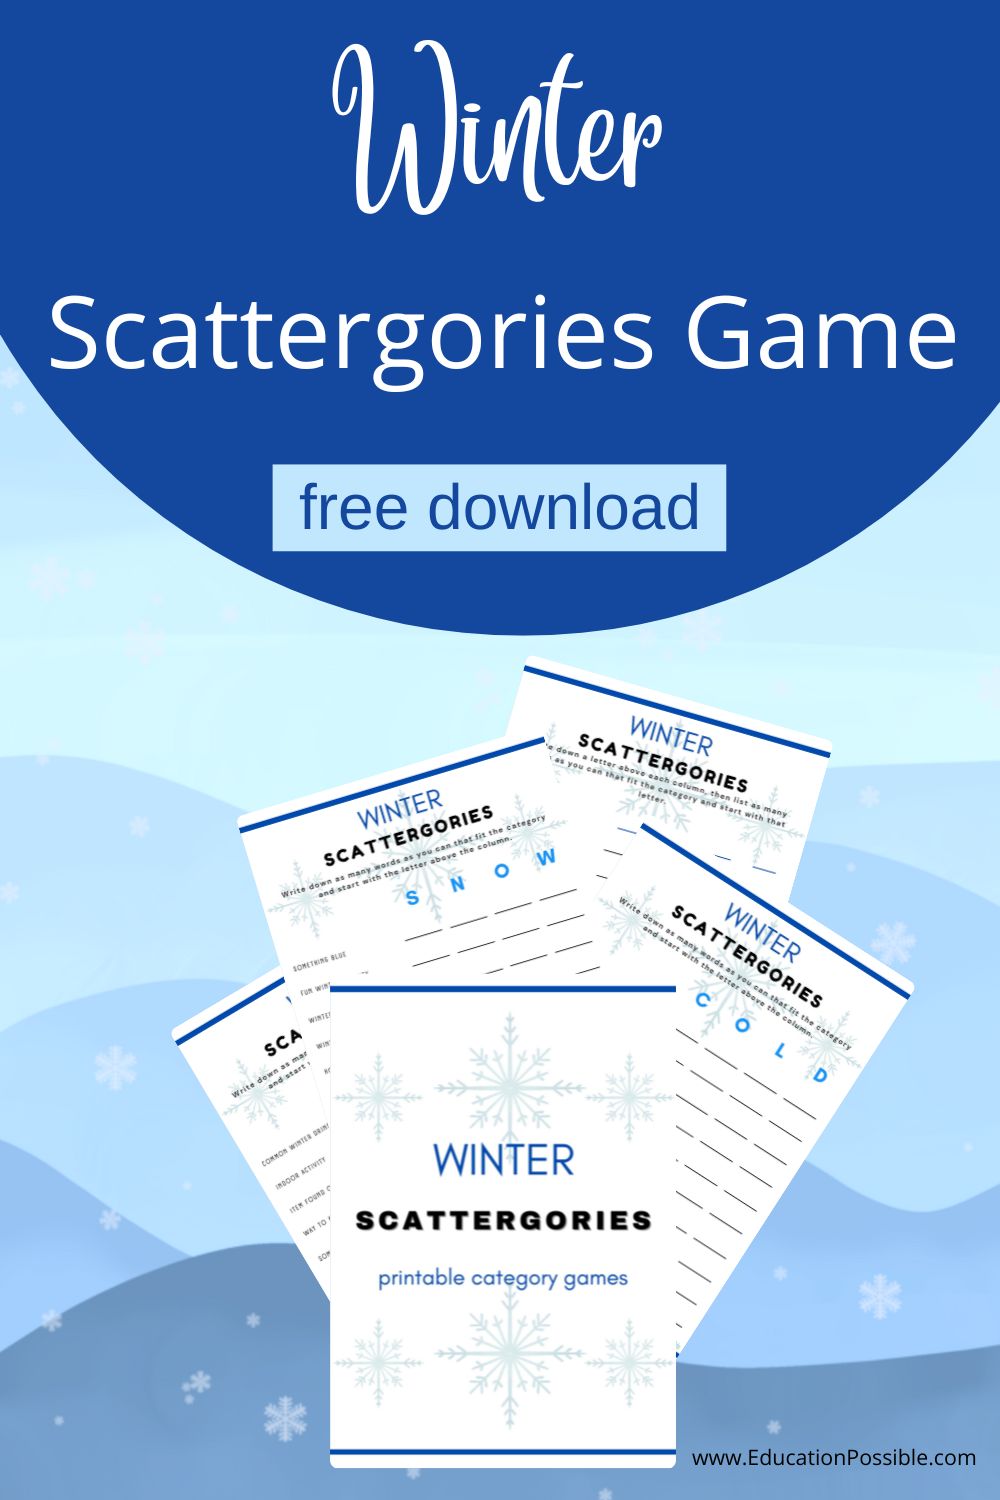 Printable Scattergories game sheets on top of a winter background